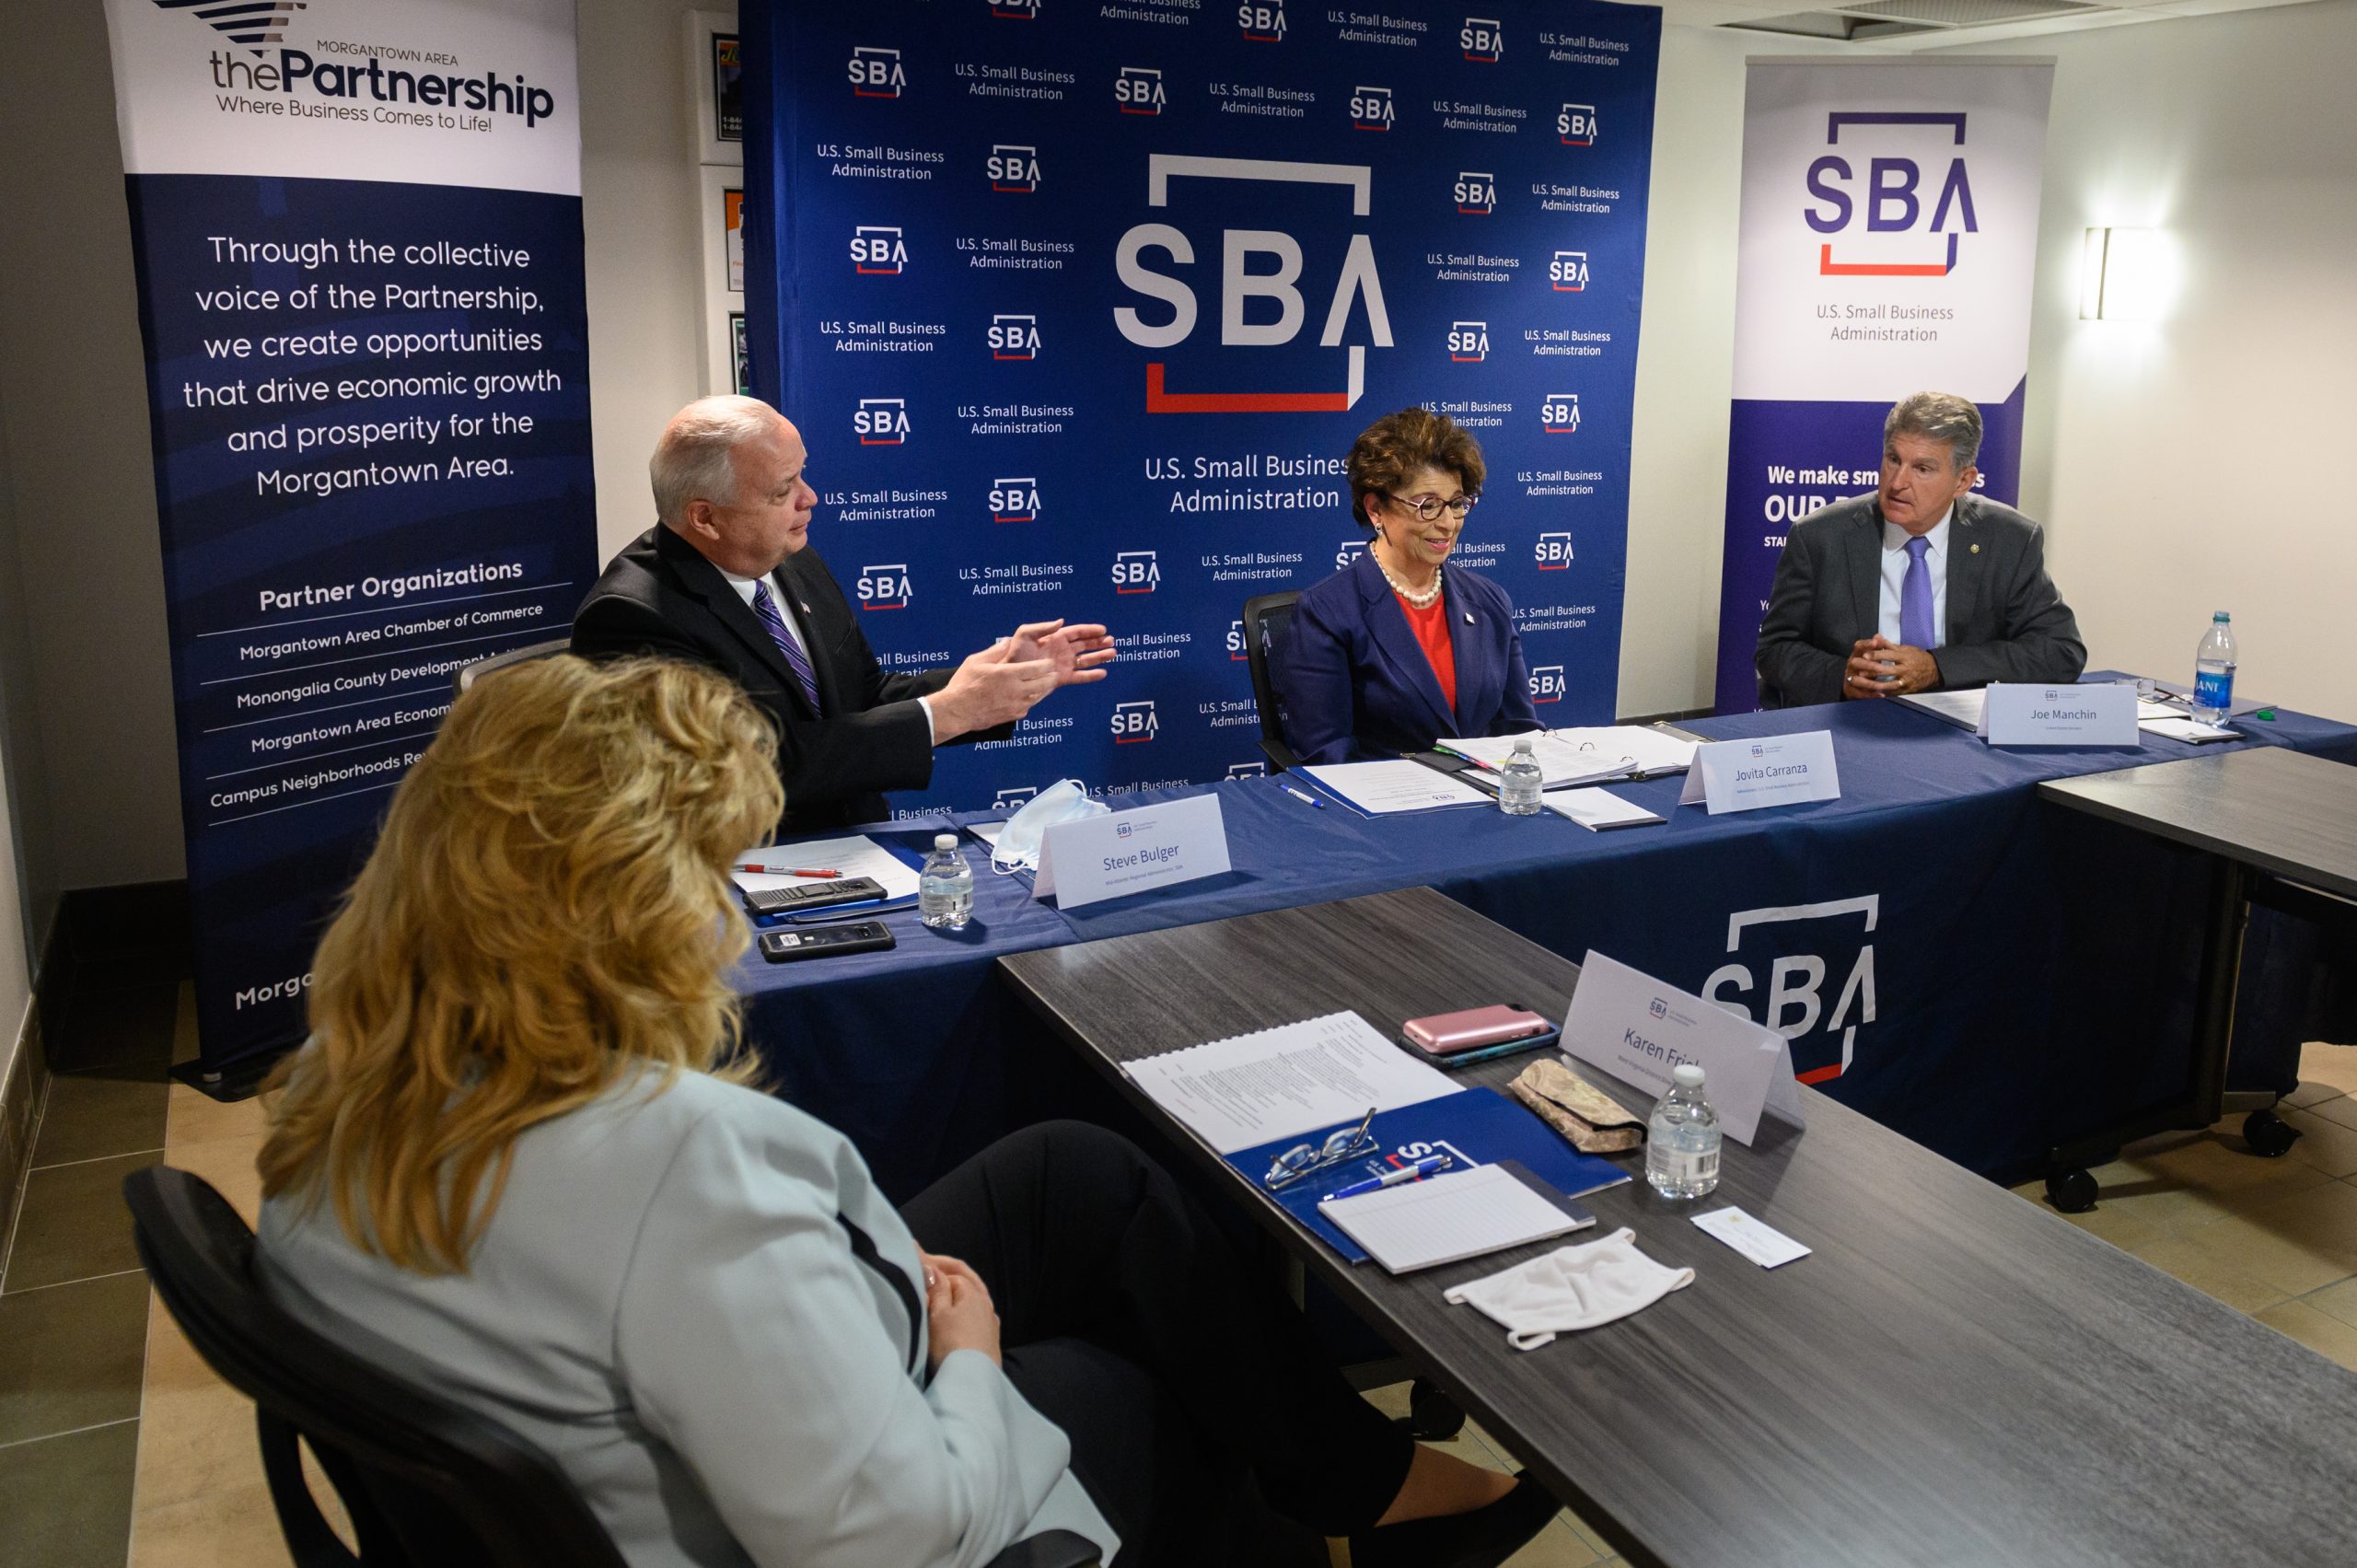 Jovita Carranza, the administrator of the Small Business Administration, center, and Sen. Joe Manchin, right, participate at a roundtable discussion at the Morgantown Area Economic Partnership on Monday in Morgantown, West Virginia.